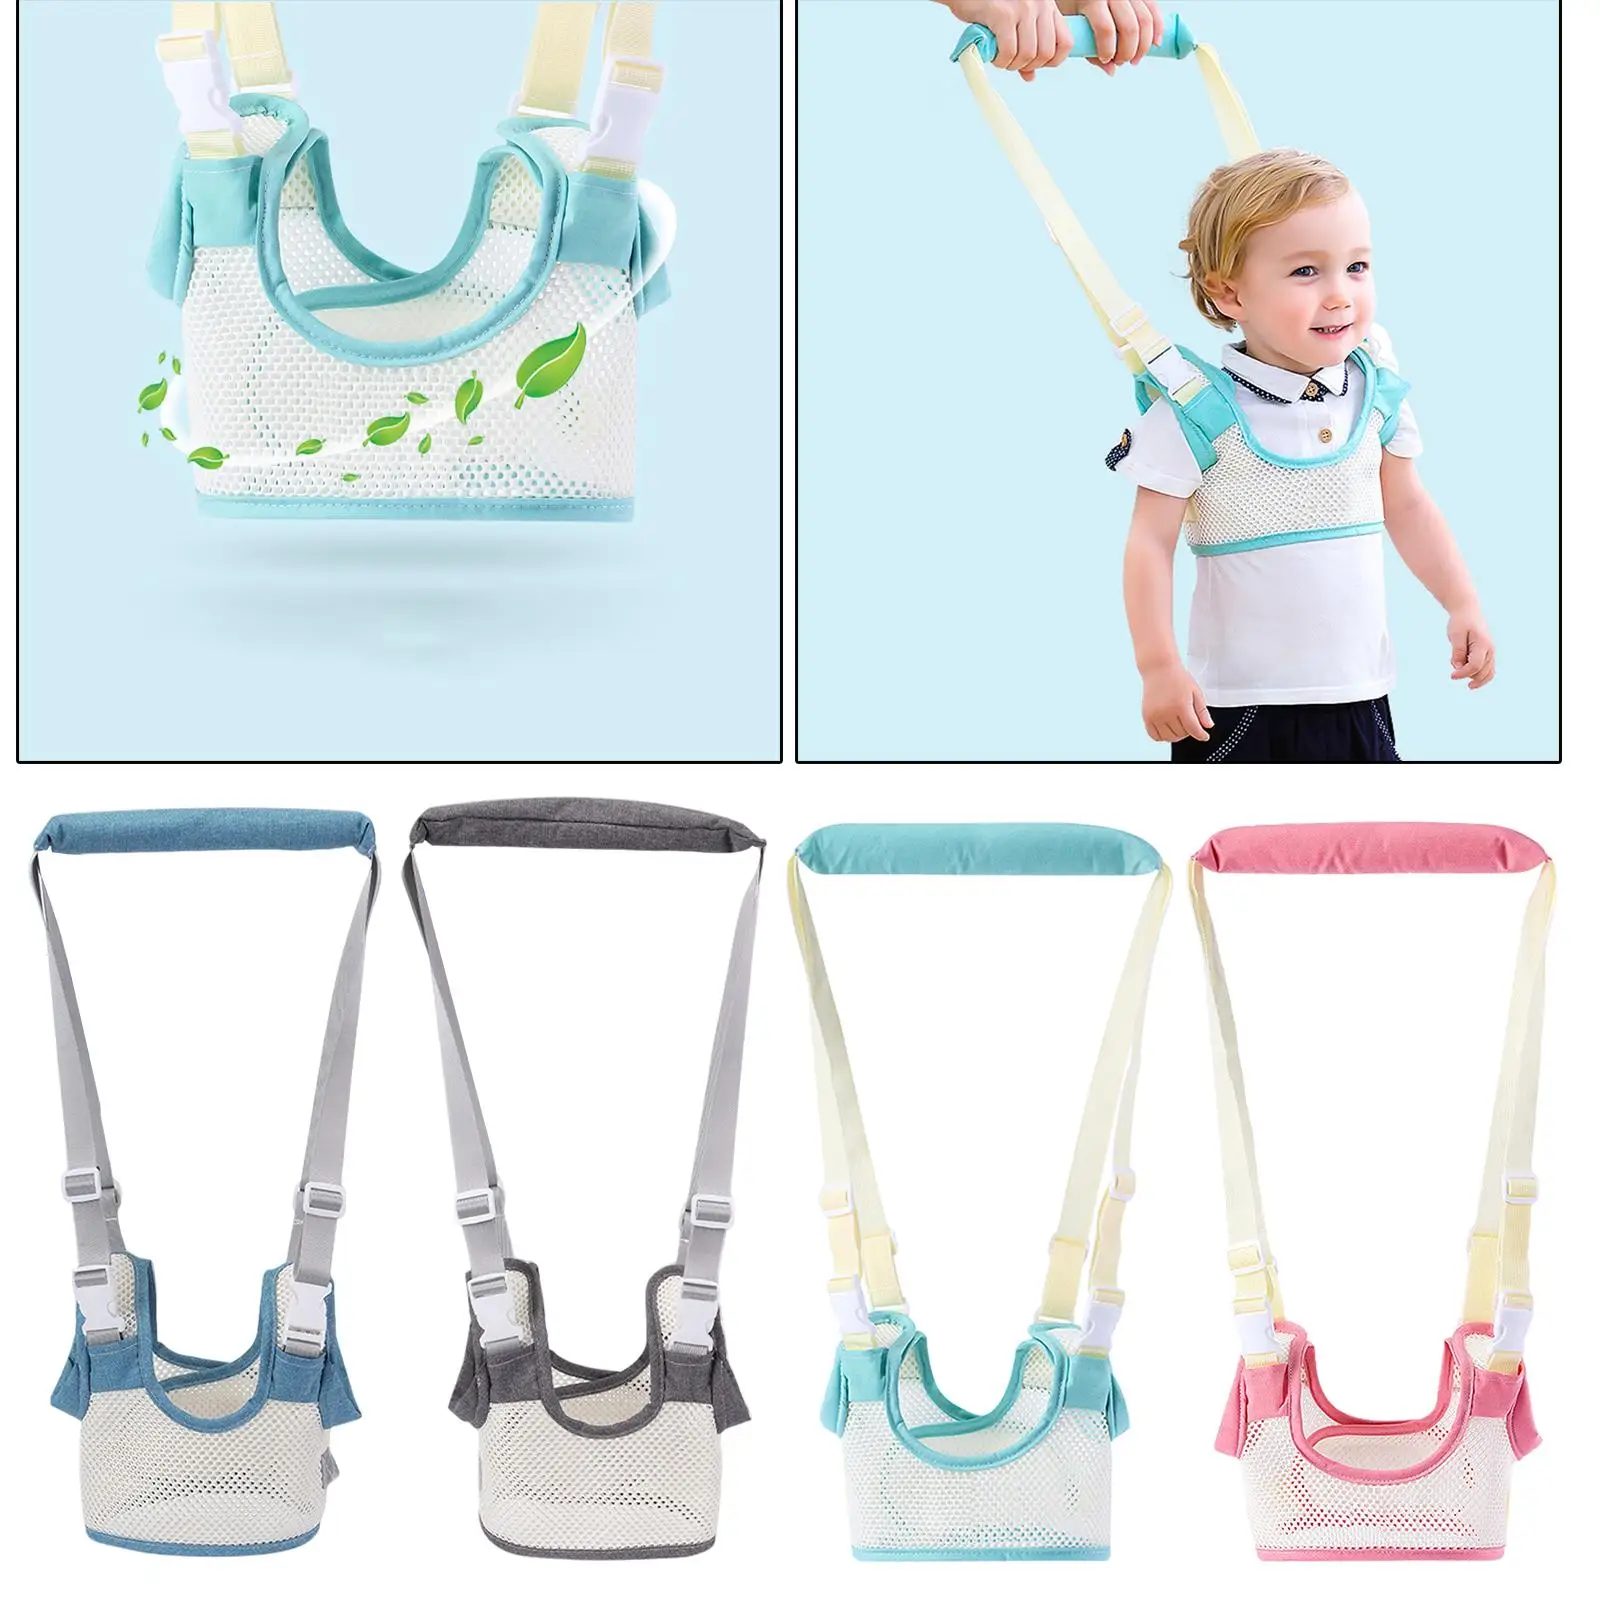 Cute Baby Toddler Walk Toddler Safety Harness Assistant Walk Learning Walking Baby Walk Assistant Belt